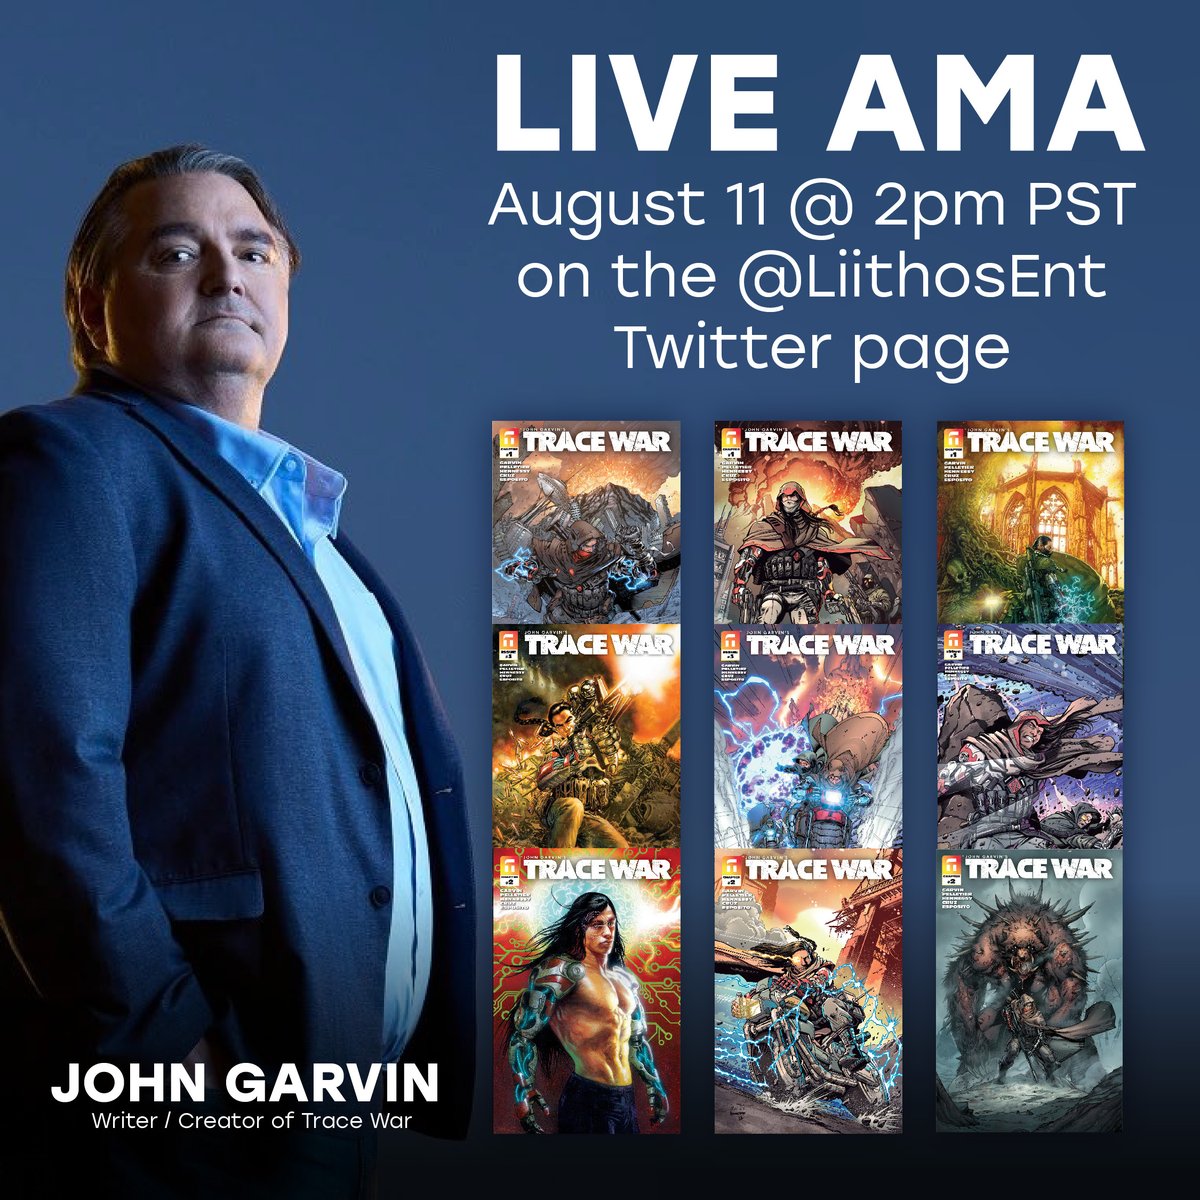 Are you guys ready for this? I know many of you have been waiting for this event, so here ya go!!! Don't miss this opportunity, Tomorrow Friday August 11th at 2PM PST on our Twitter page hosting a LIVE AMA (Ask Me Anything) with the mind behind Trace War, Mr. John Garvin :)